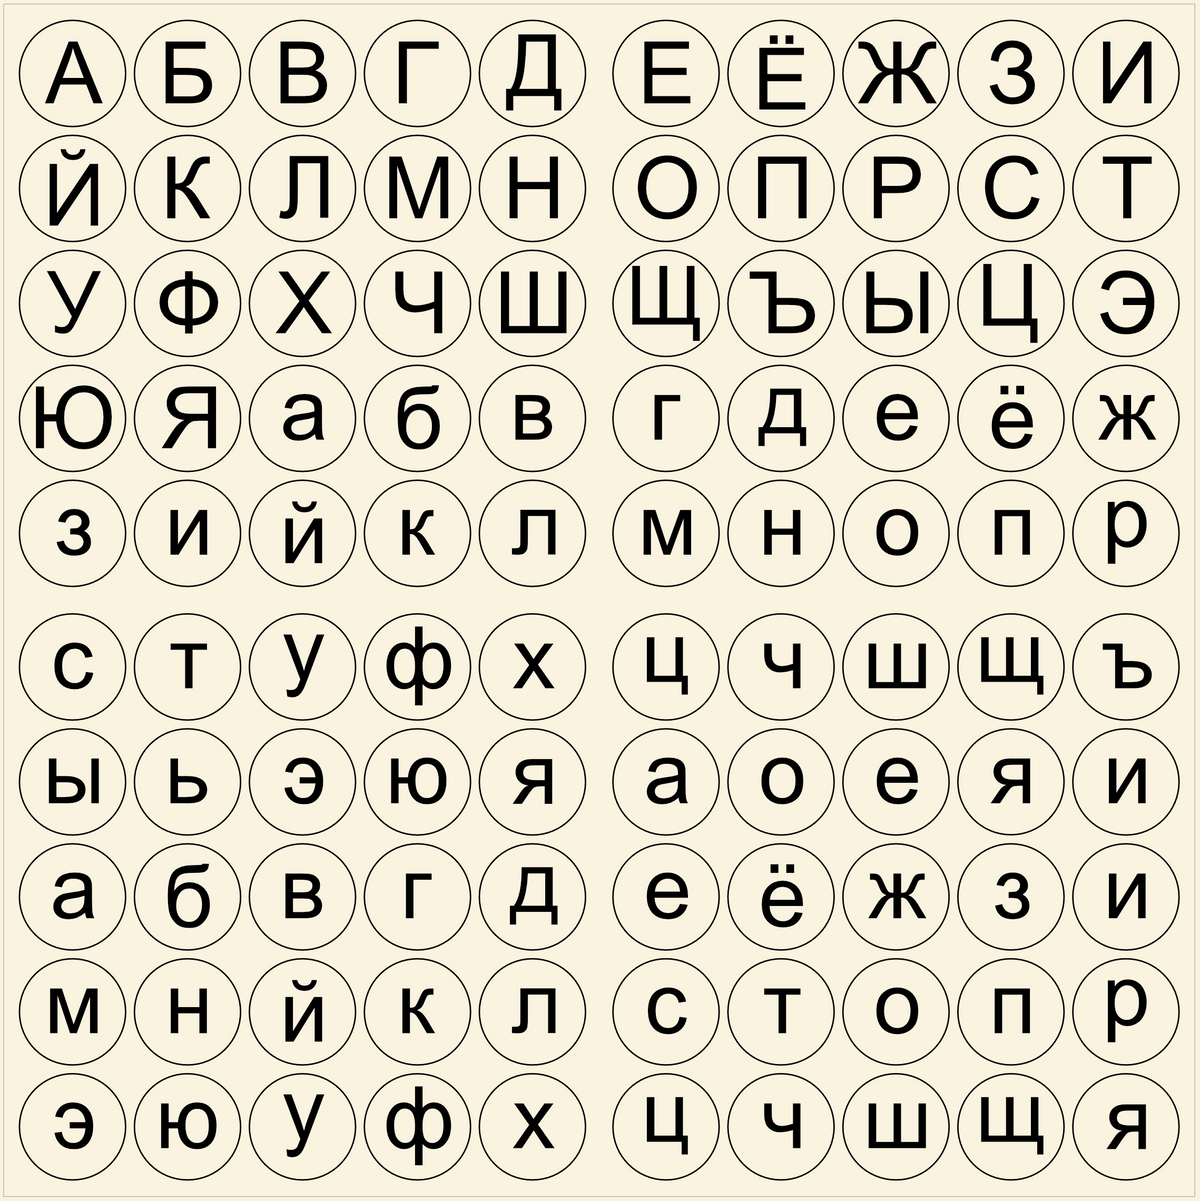 Small Coins - Russian Alphabet